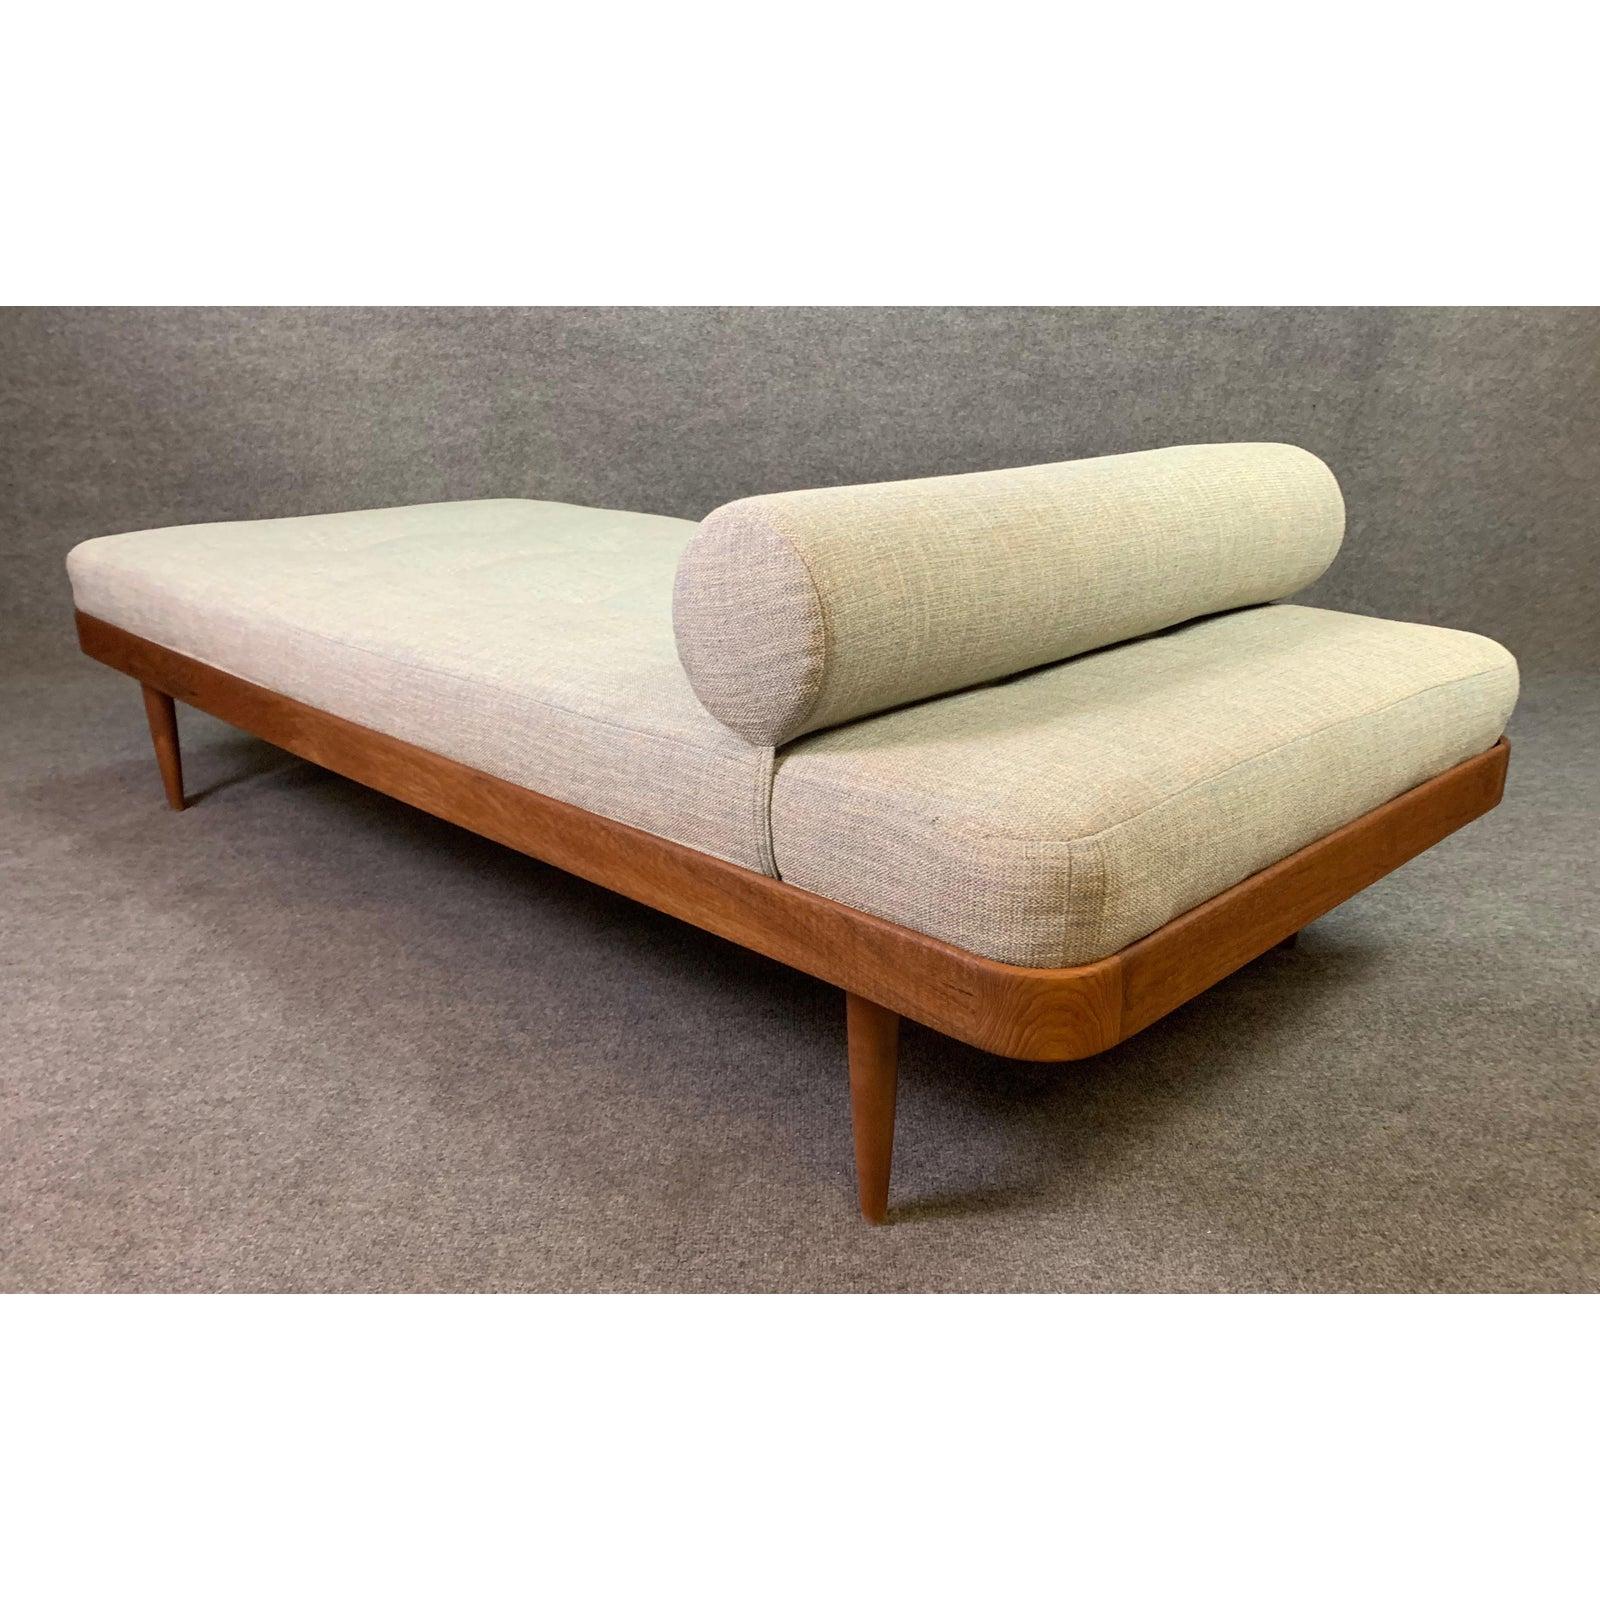 Vintage Danish Mid-Century Modern Teak Daybed In Excellent Condition For Sale In San Marcos, CA